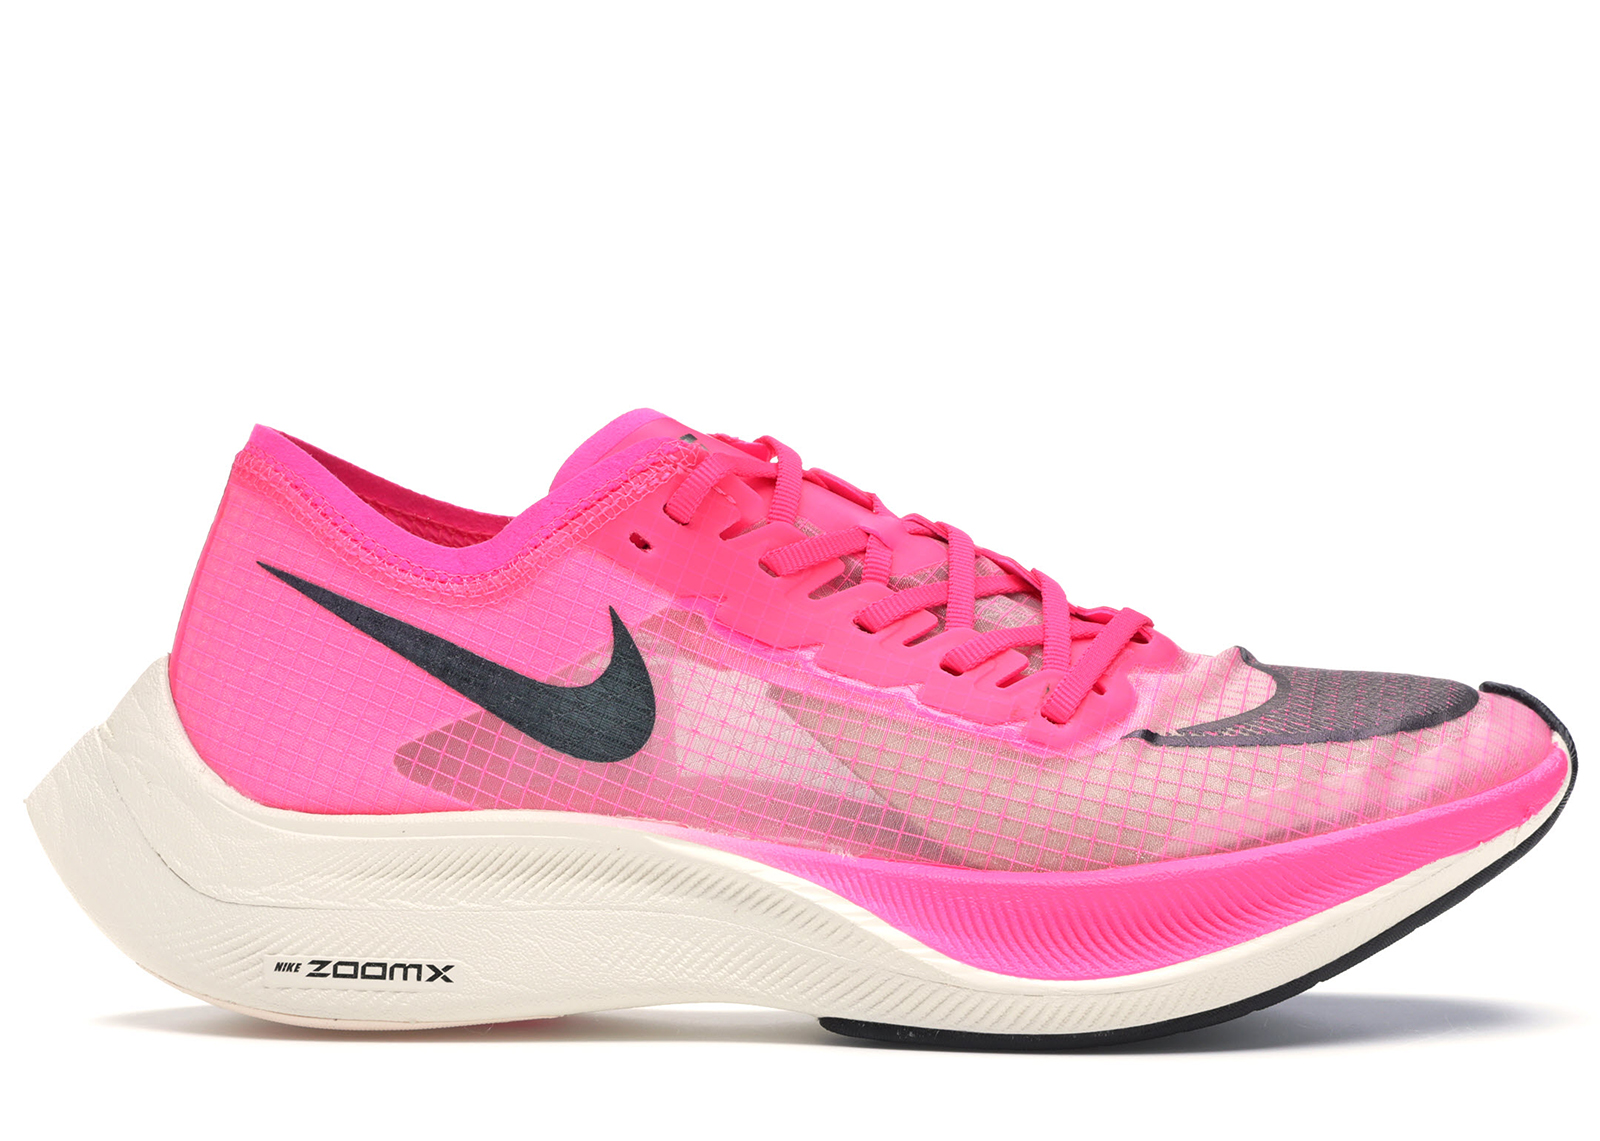 Nike ZoomX Vaporfly Next% Pink メンズ - AO4568-600 - JP